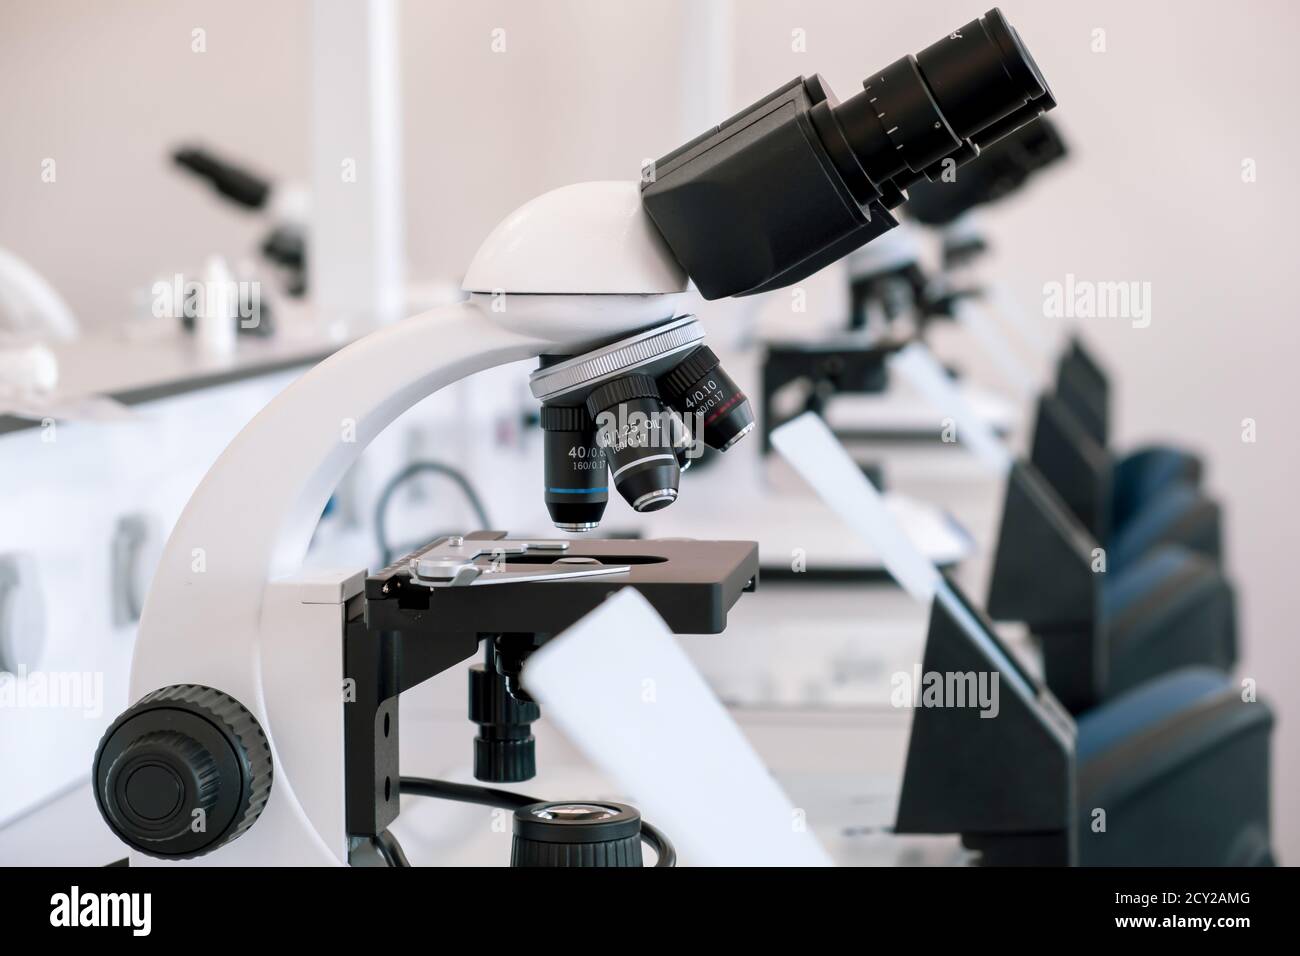 Microscope on table in the laboratory. Line of microscopes on tables in a hospital laboratory without people. Stock Photo